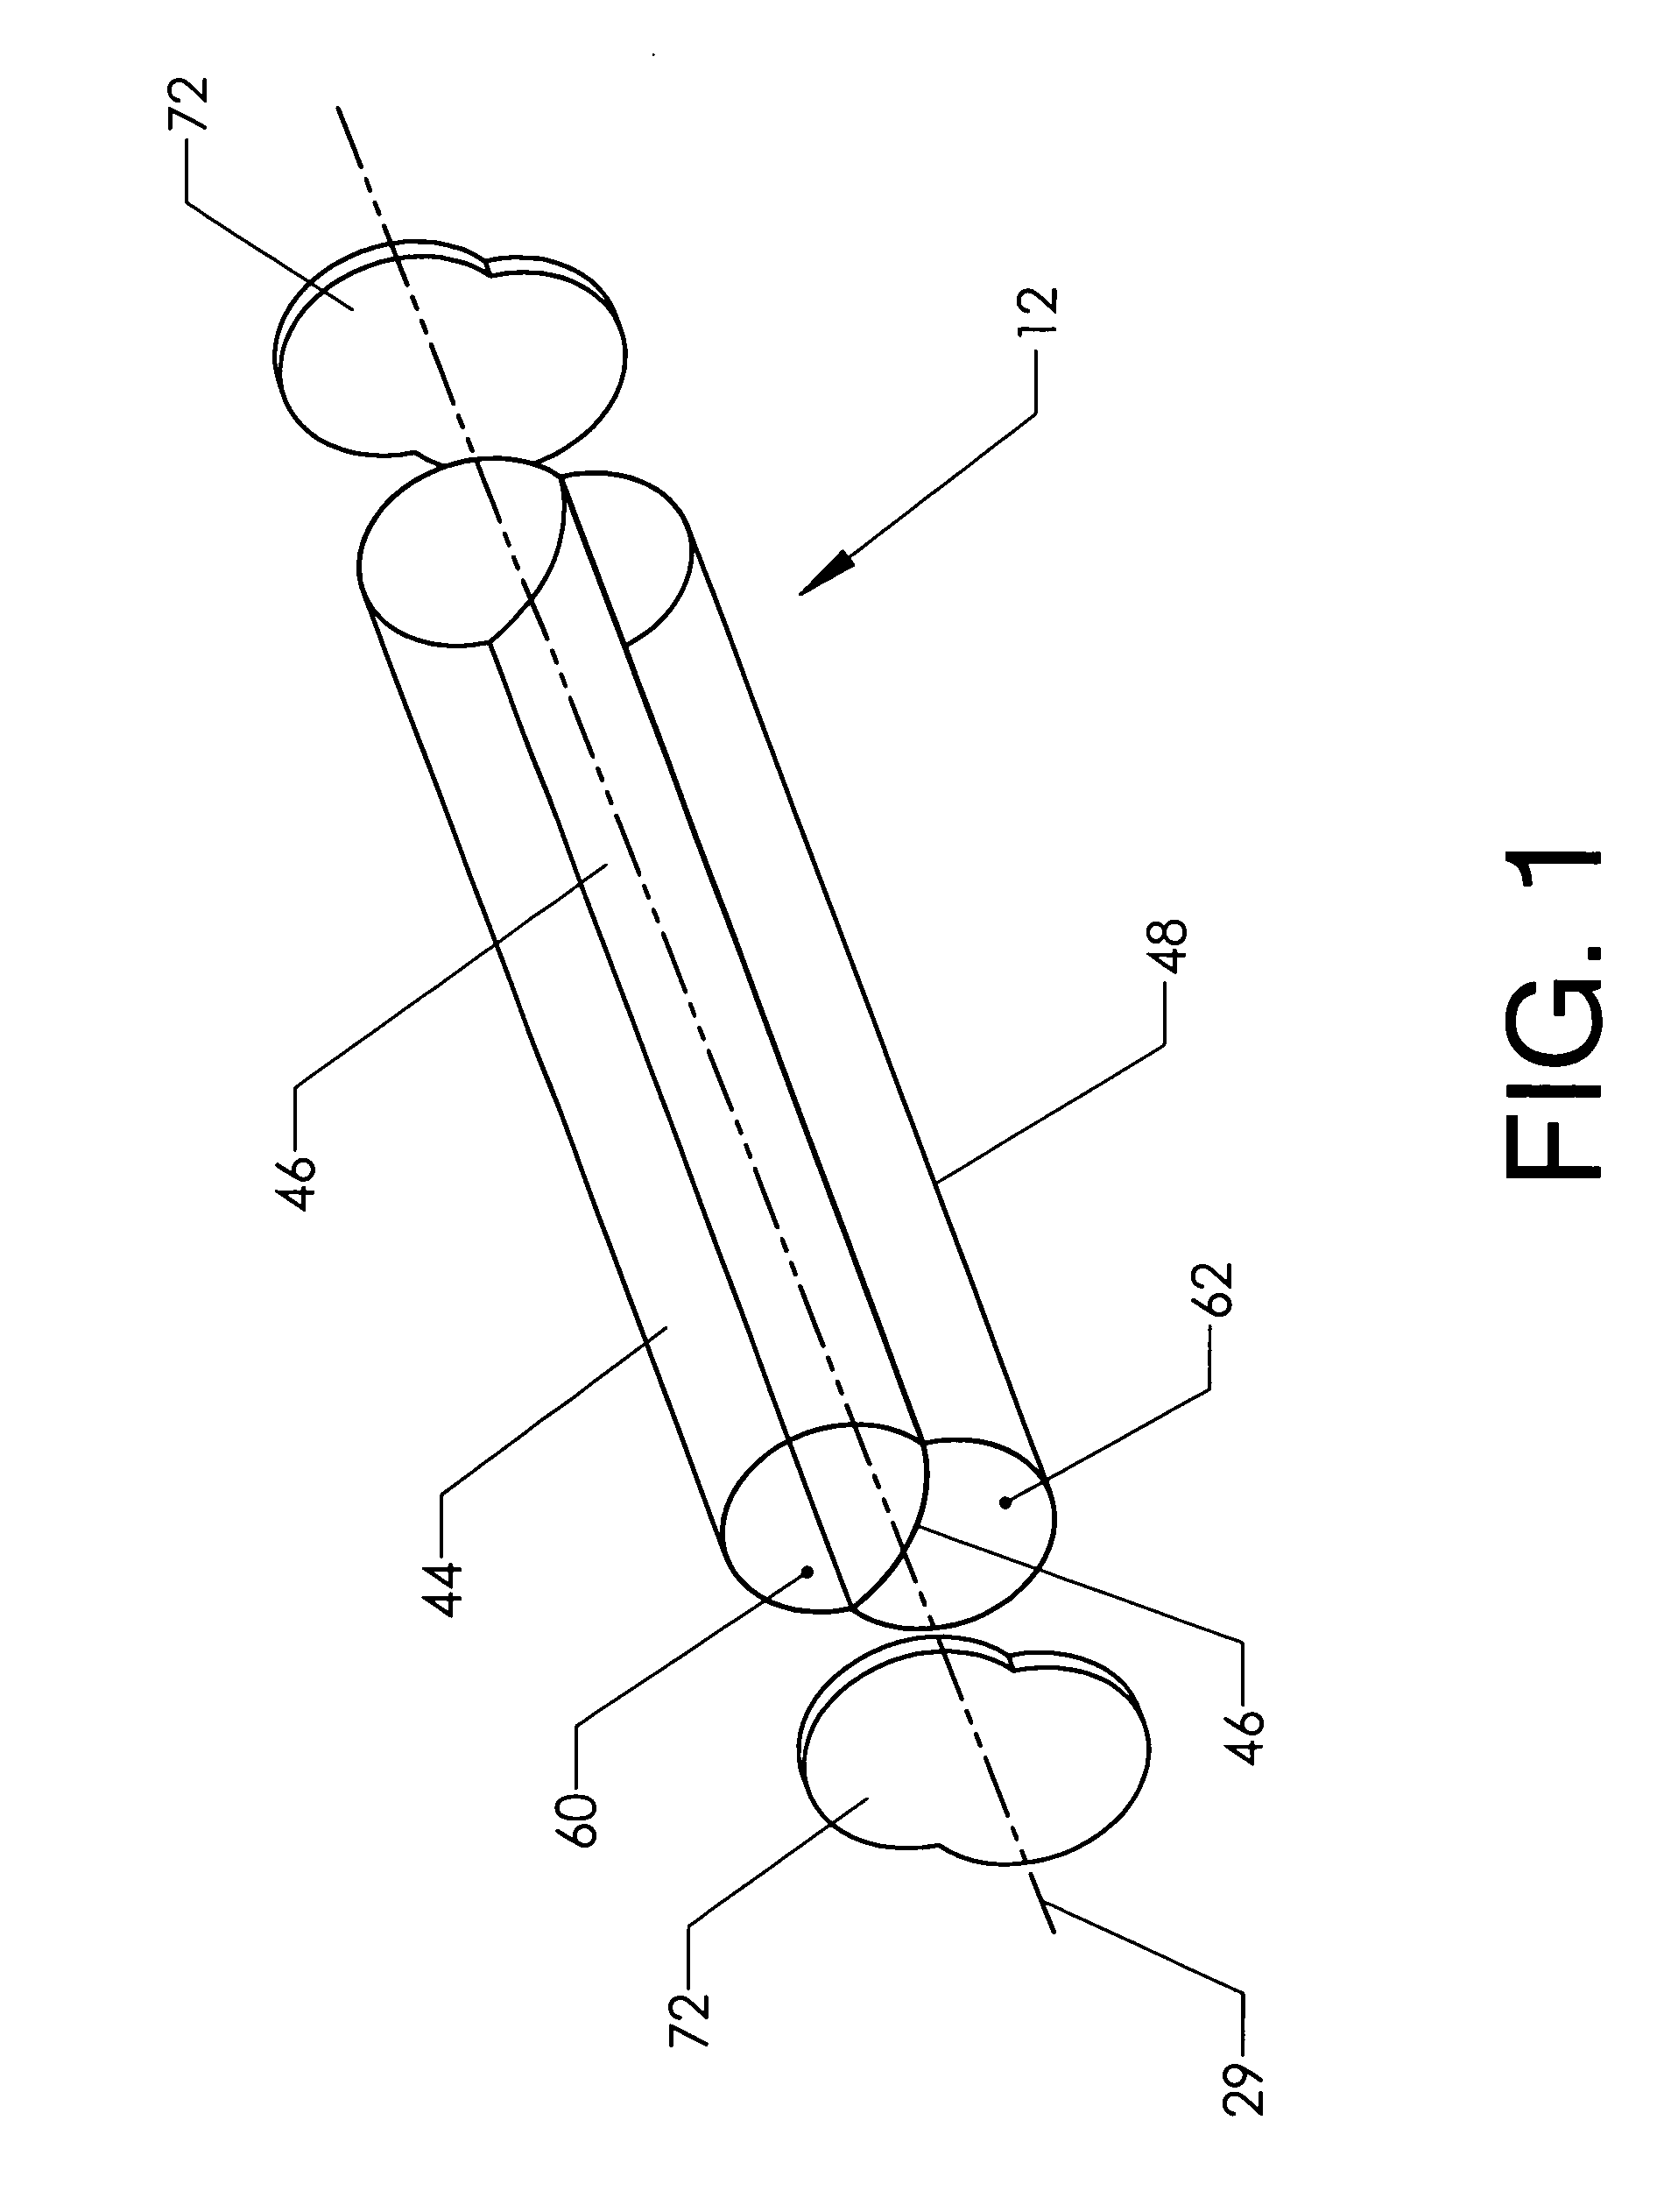 Inflatable solar energy collector apparatus